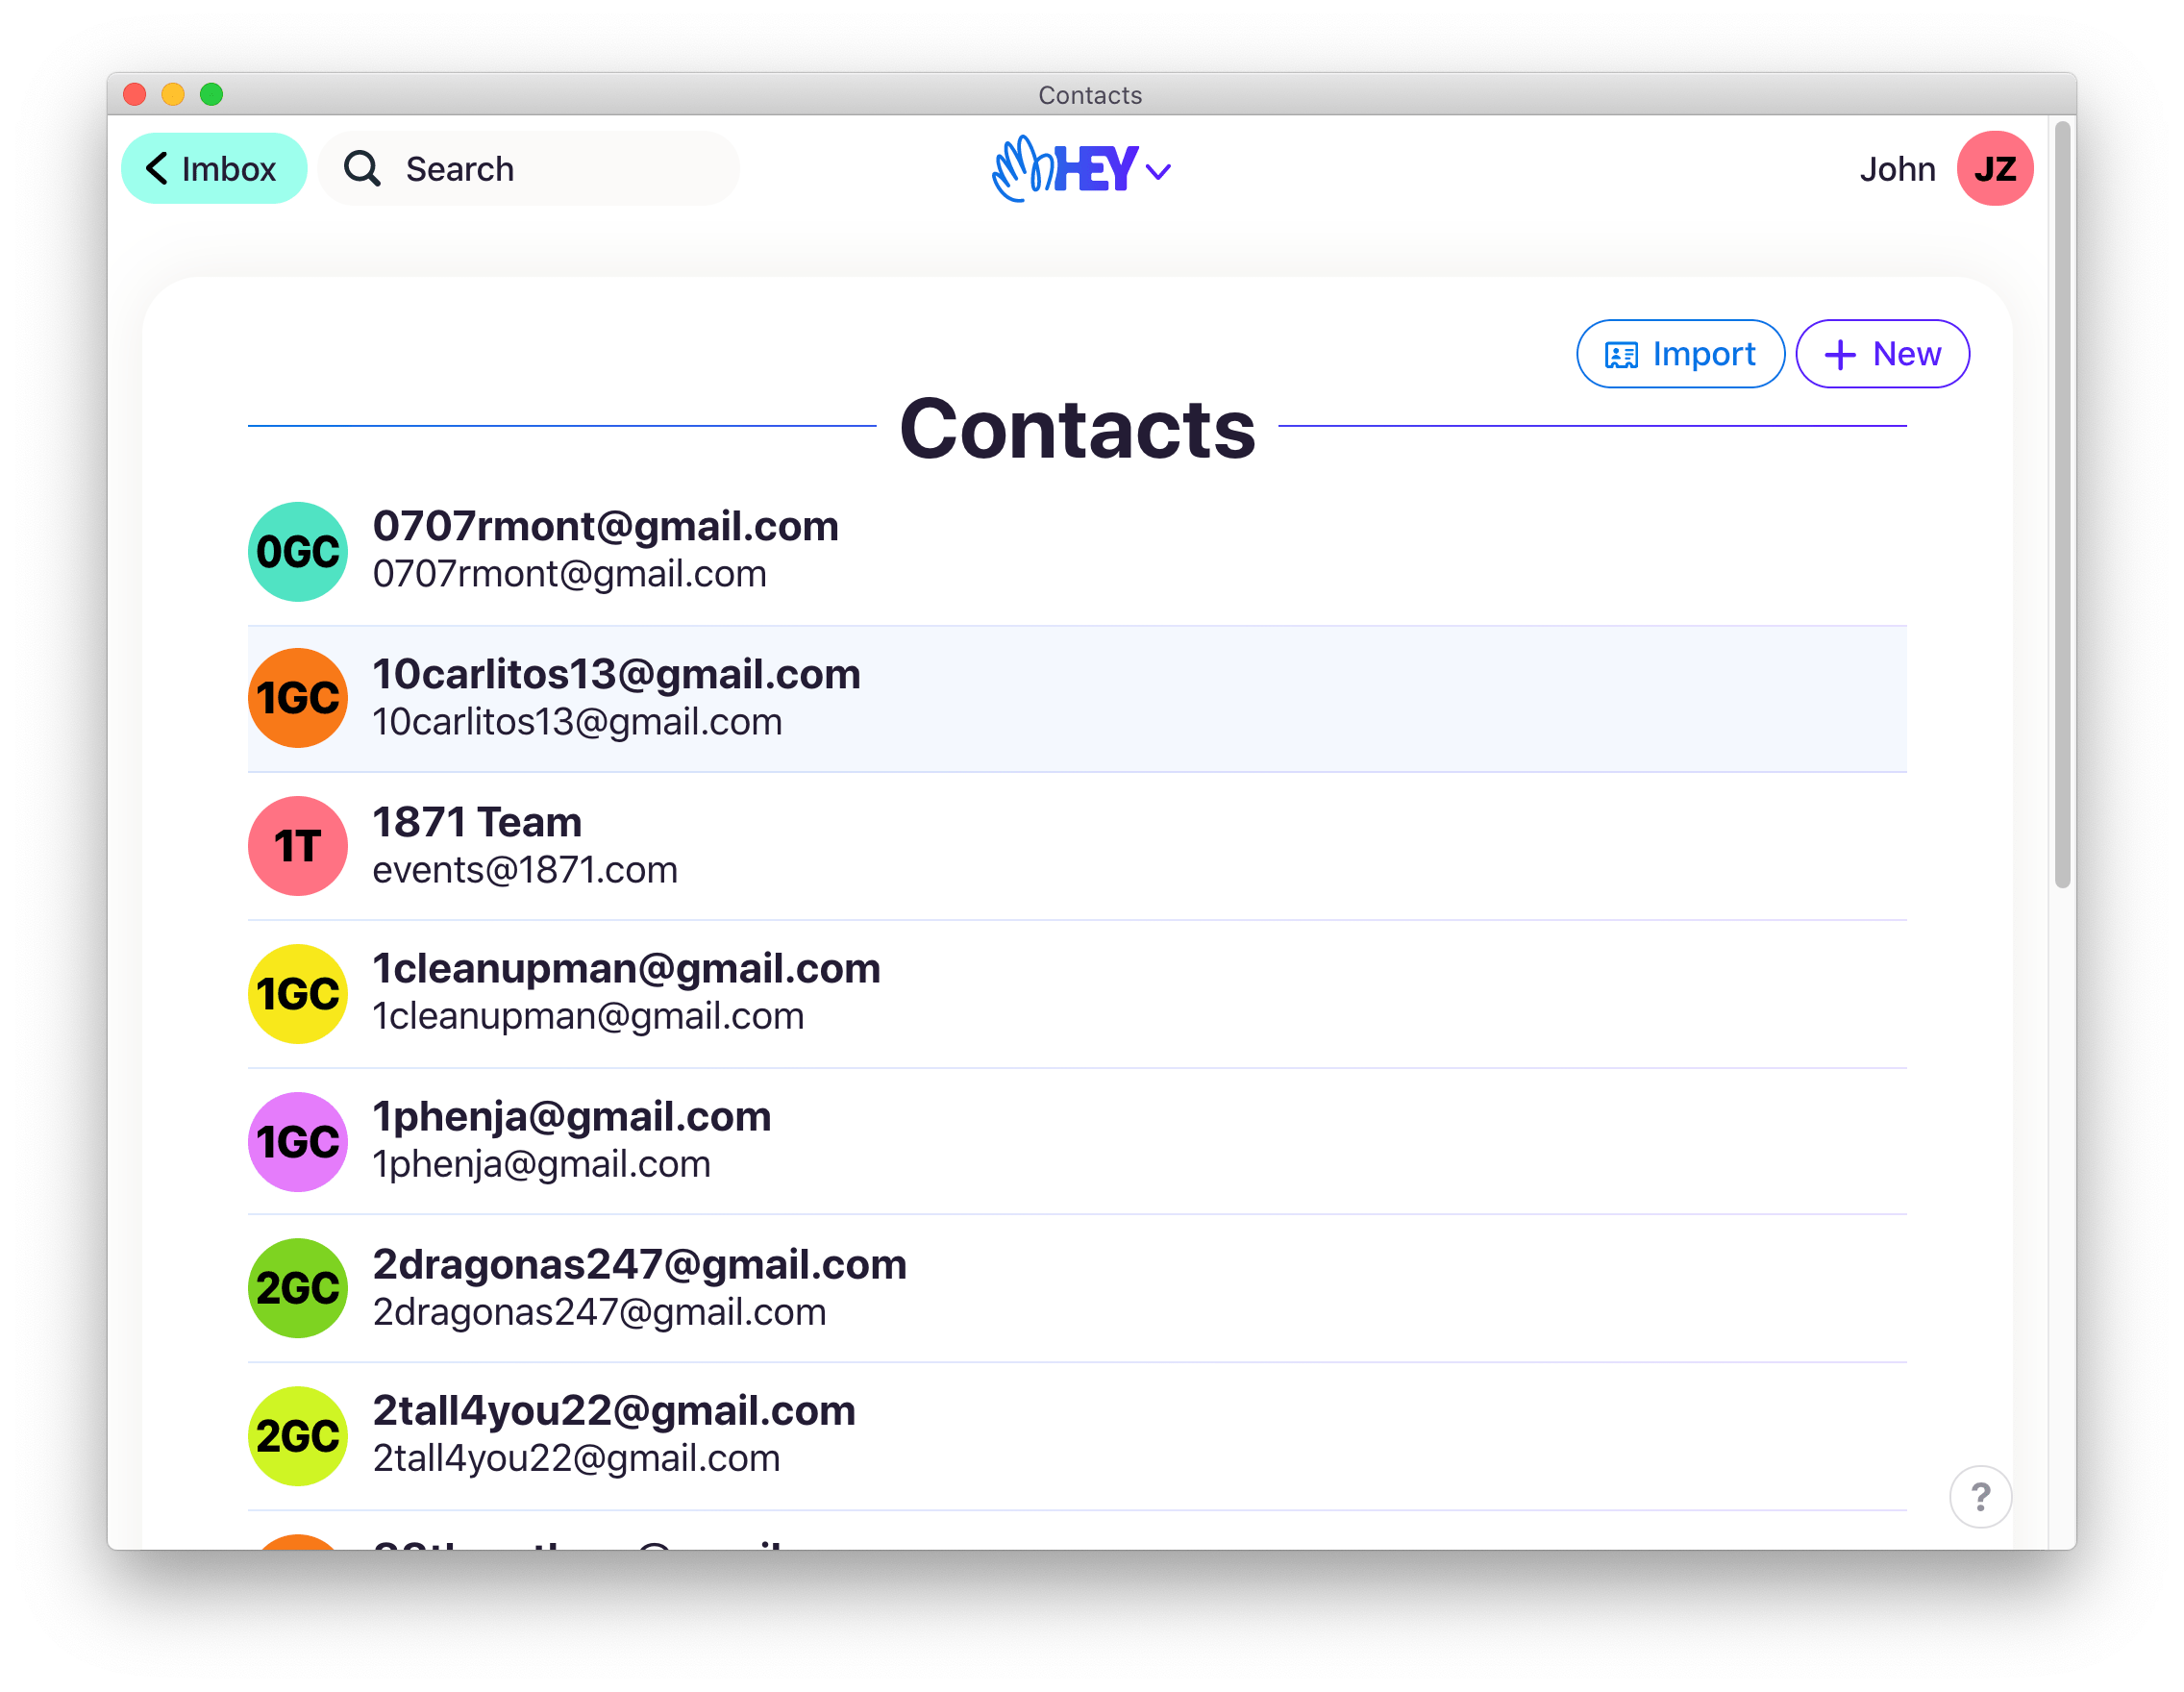 HEY Contacts page